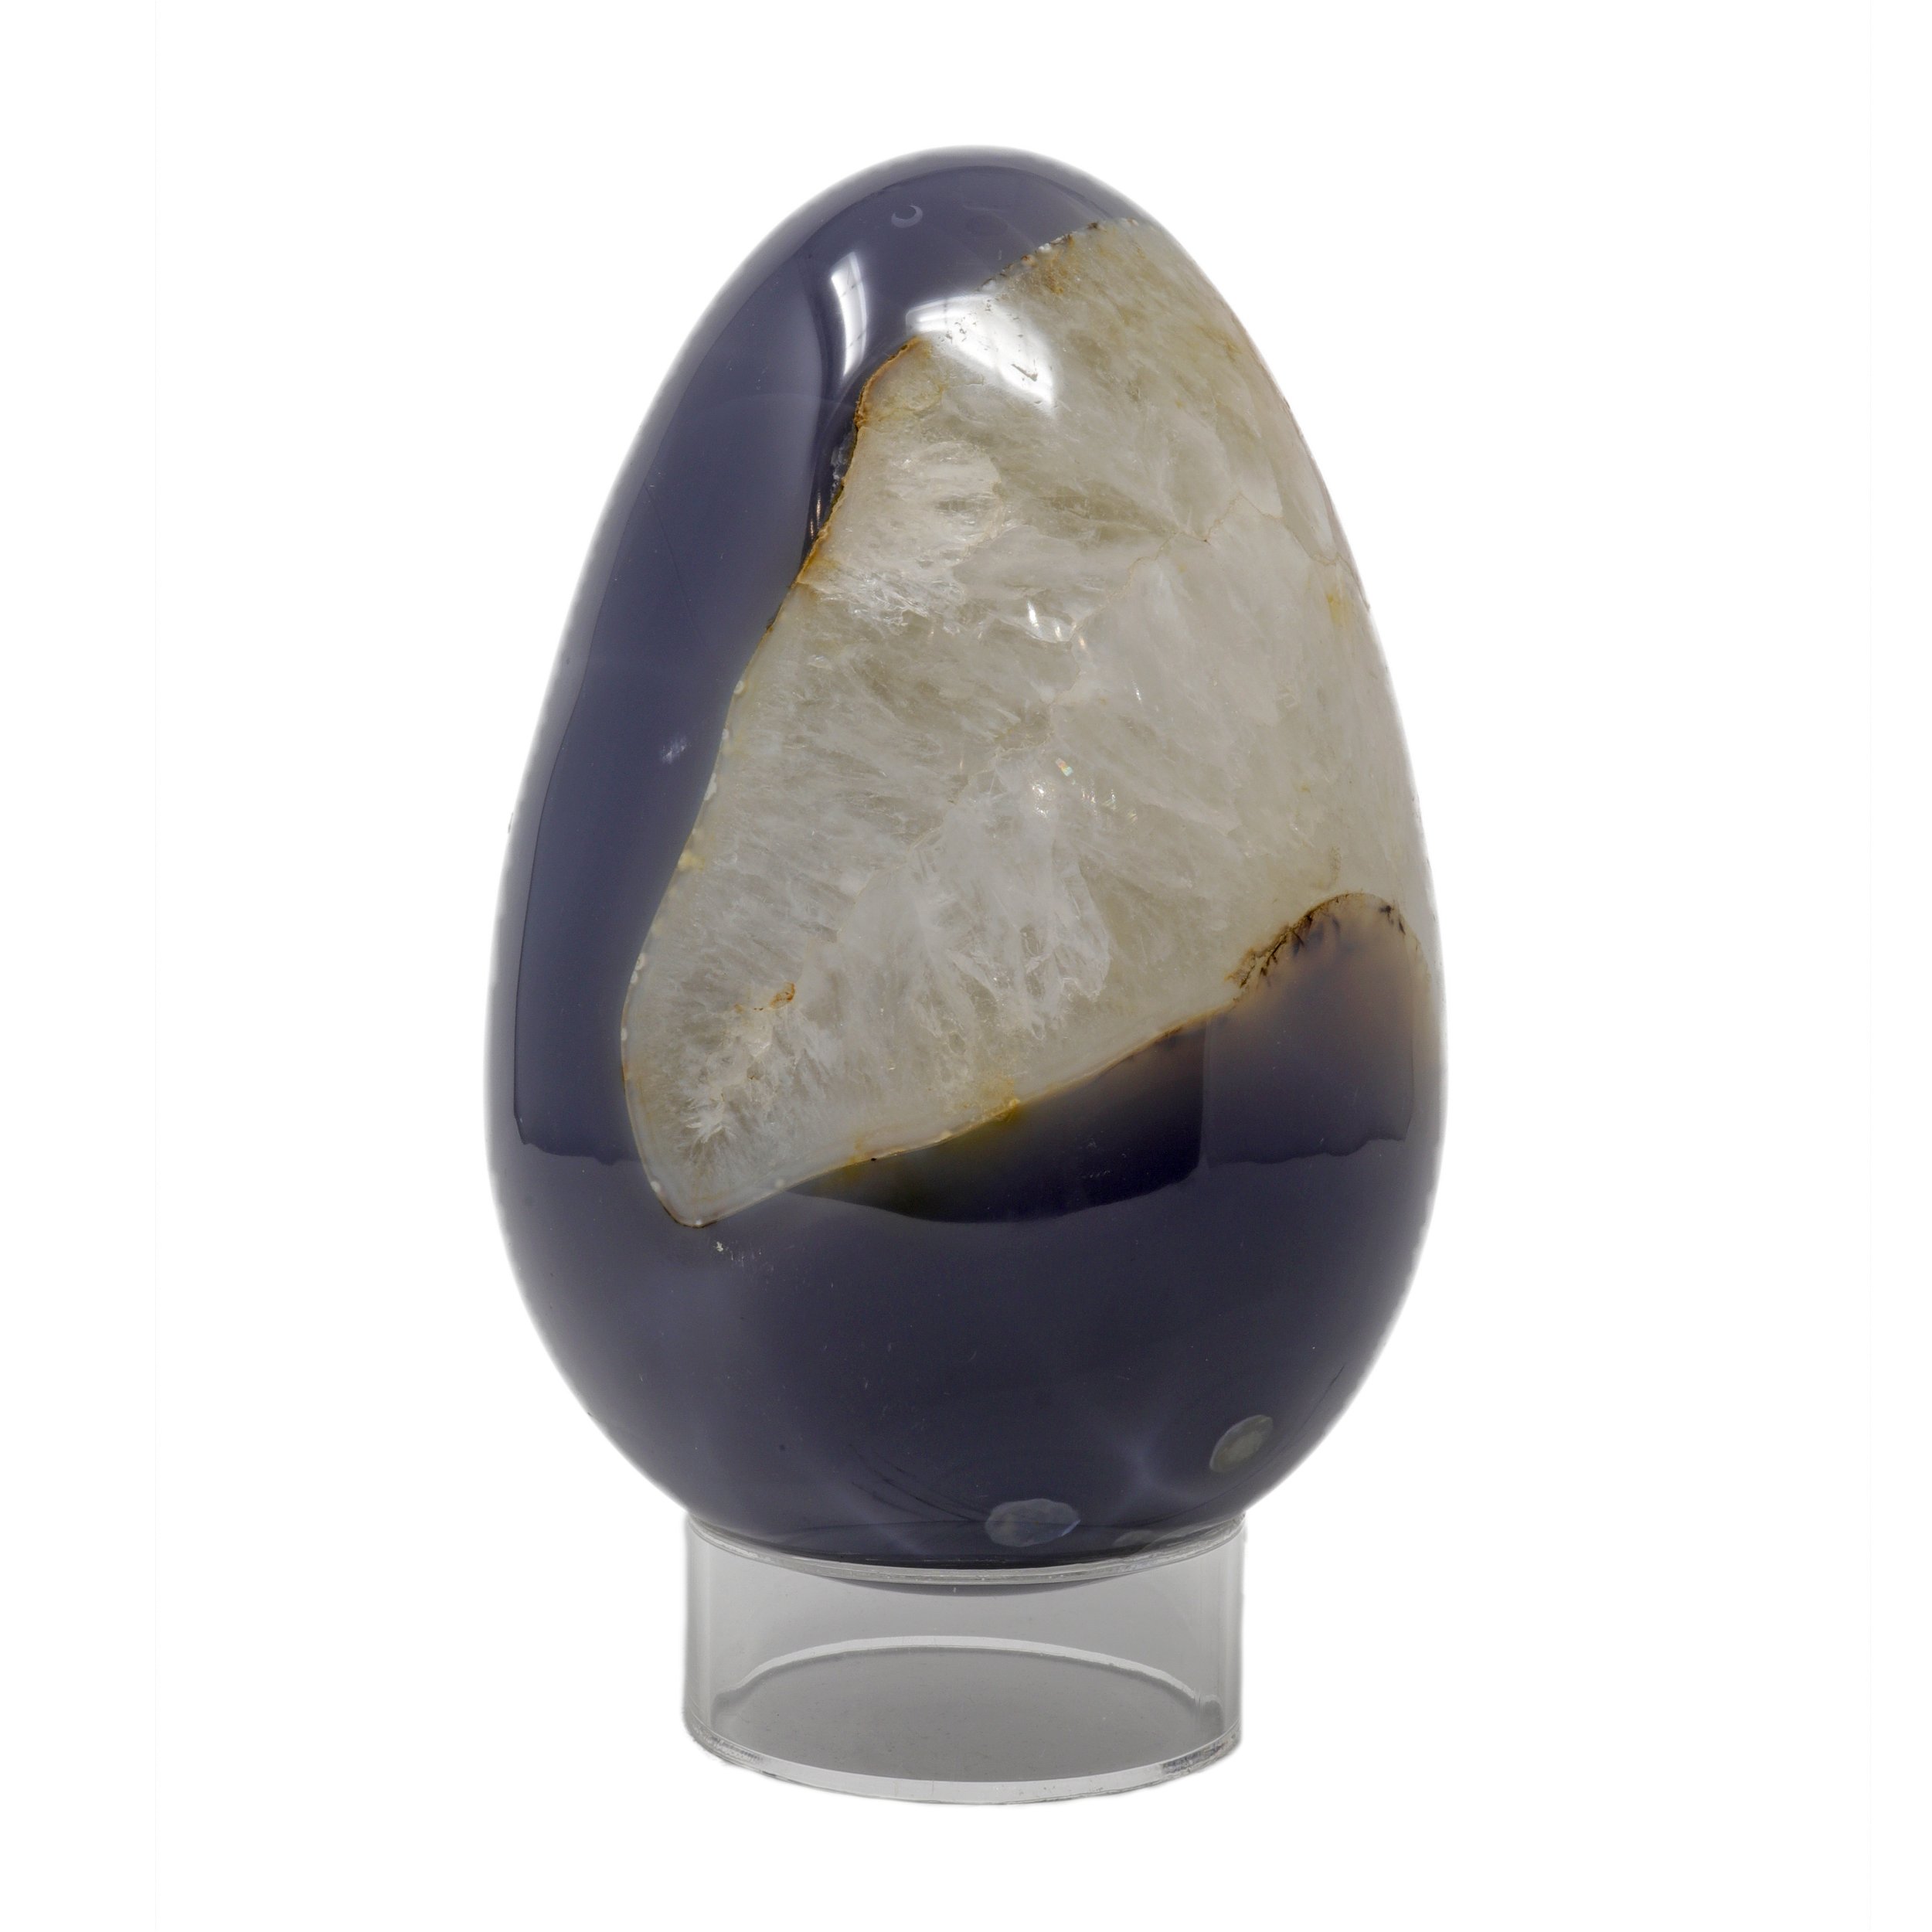 Agate Egg -Jean Blue With Quartz Band And Iron Inclusion